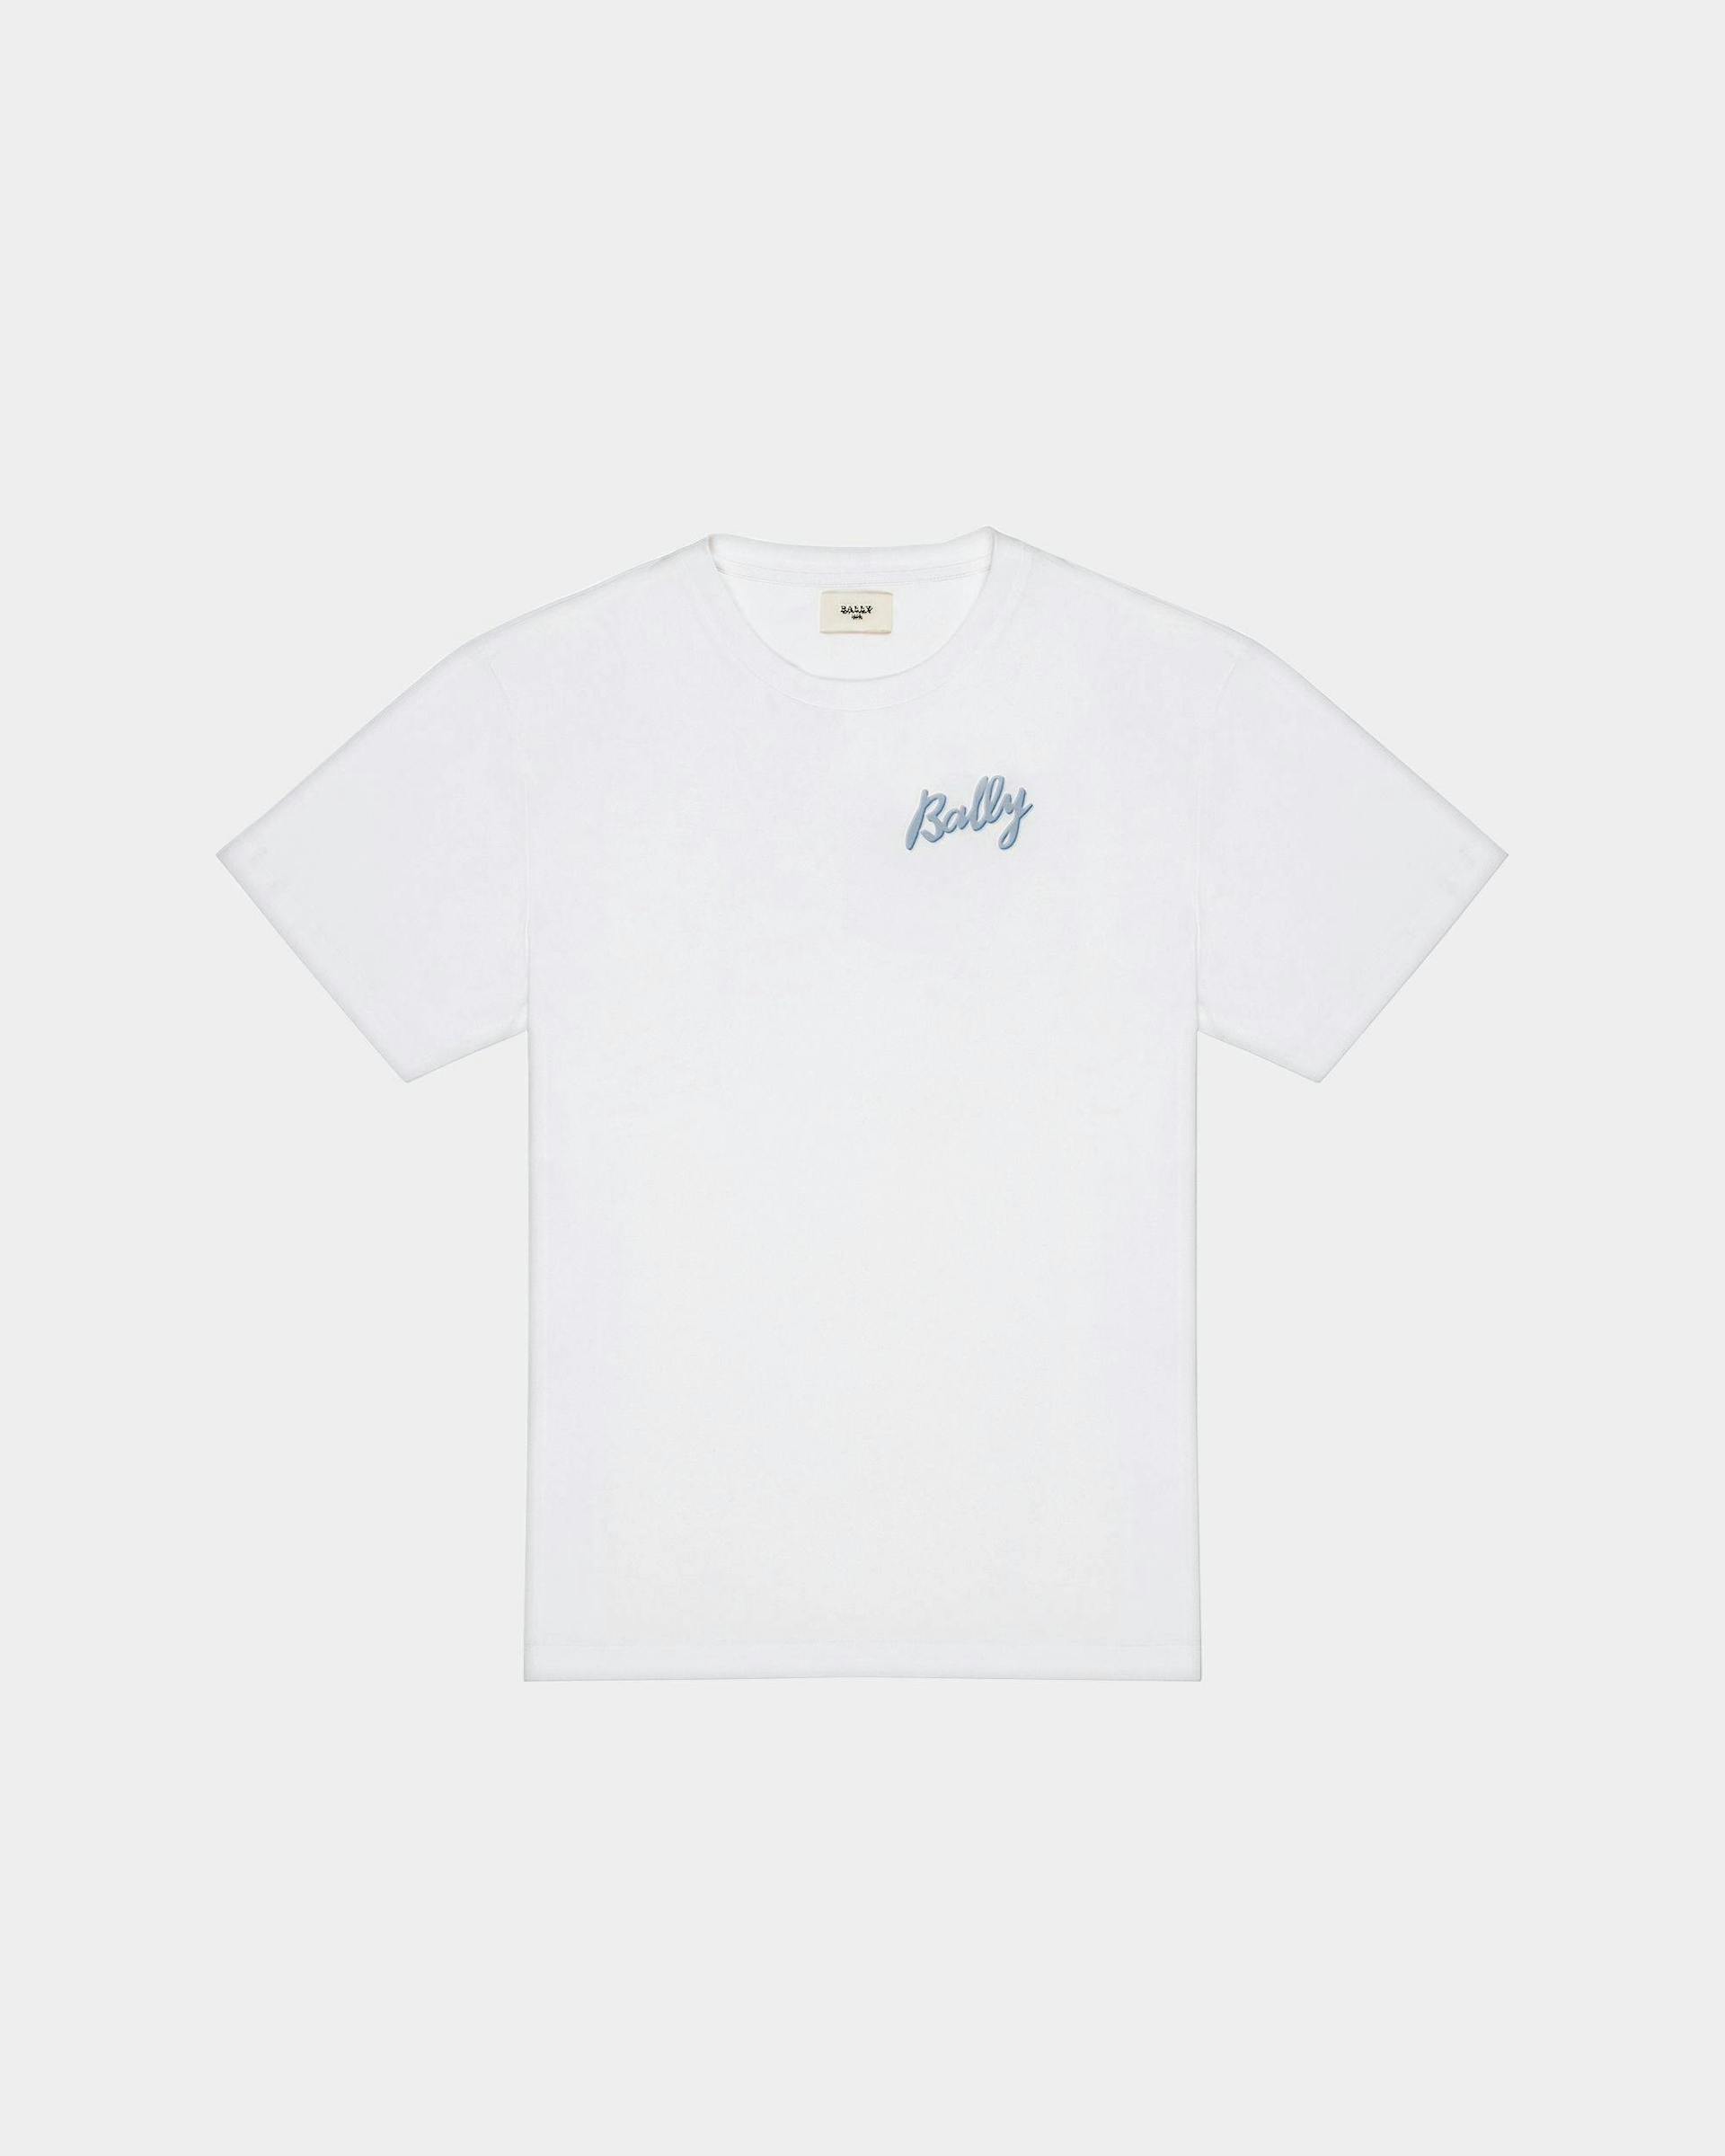 Cotton T-Shirt In White And Light Blue - Men's - Bally - 01